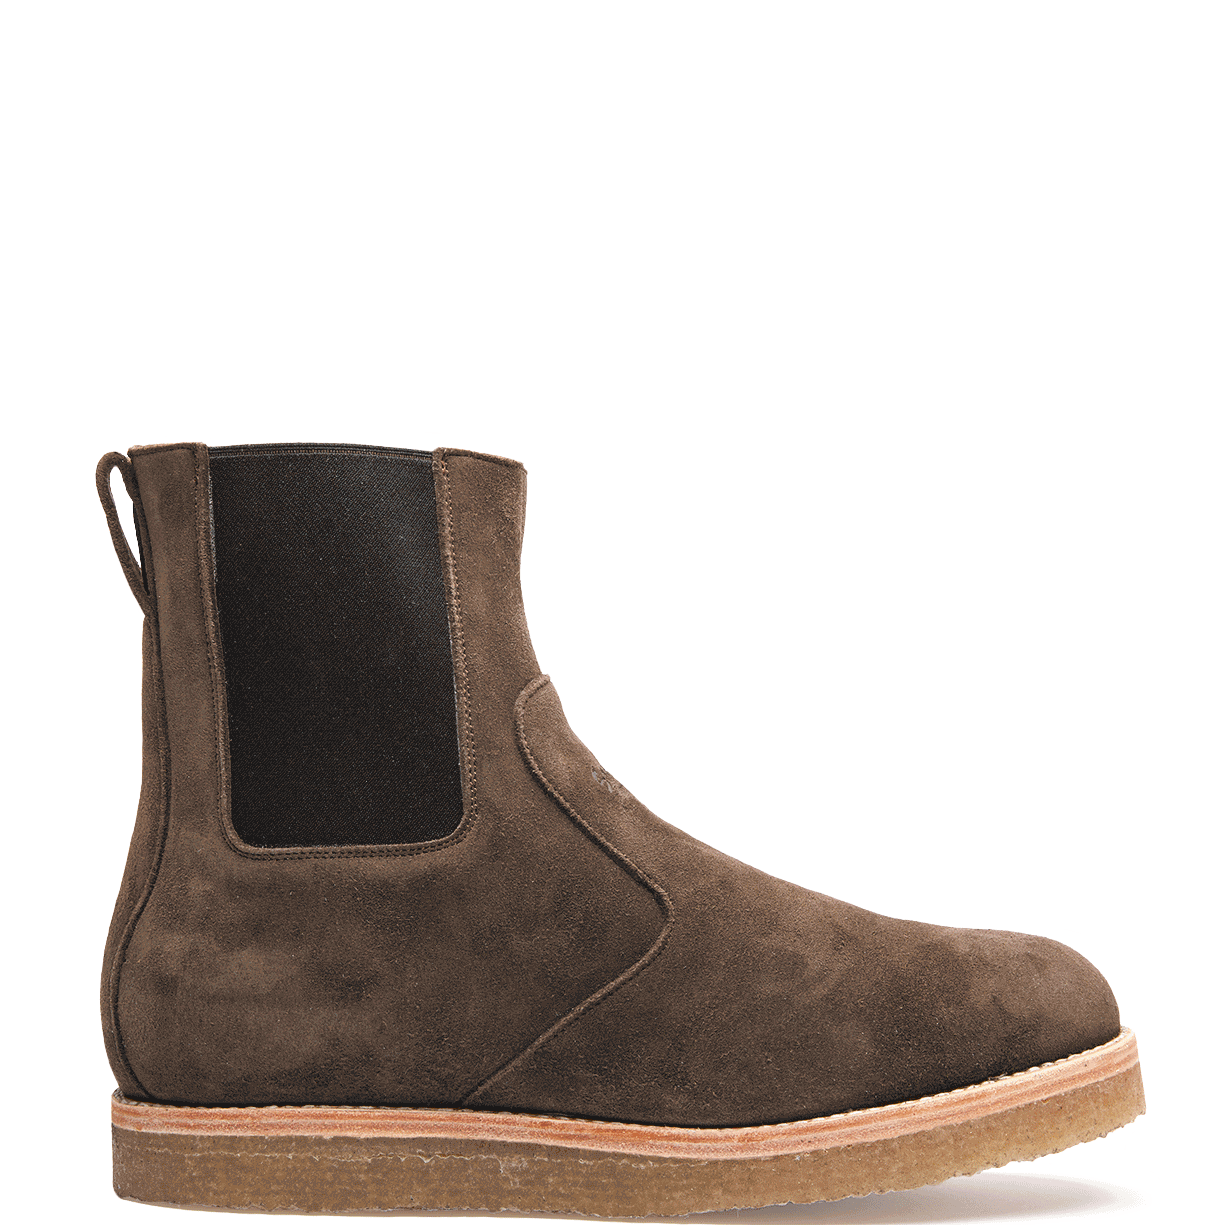 Santa Rosa Brand Stamford Brown suede Chelsea boot on a black background.